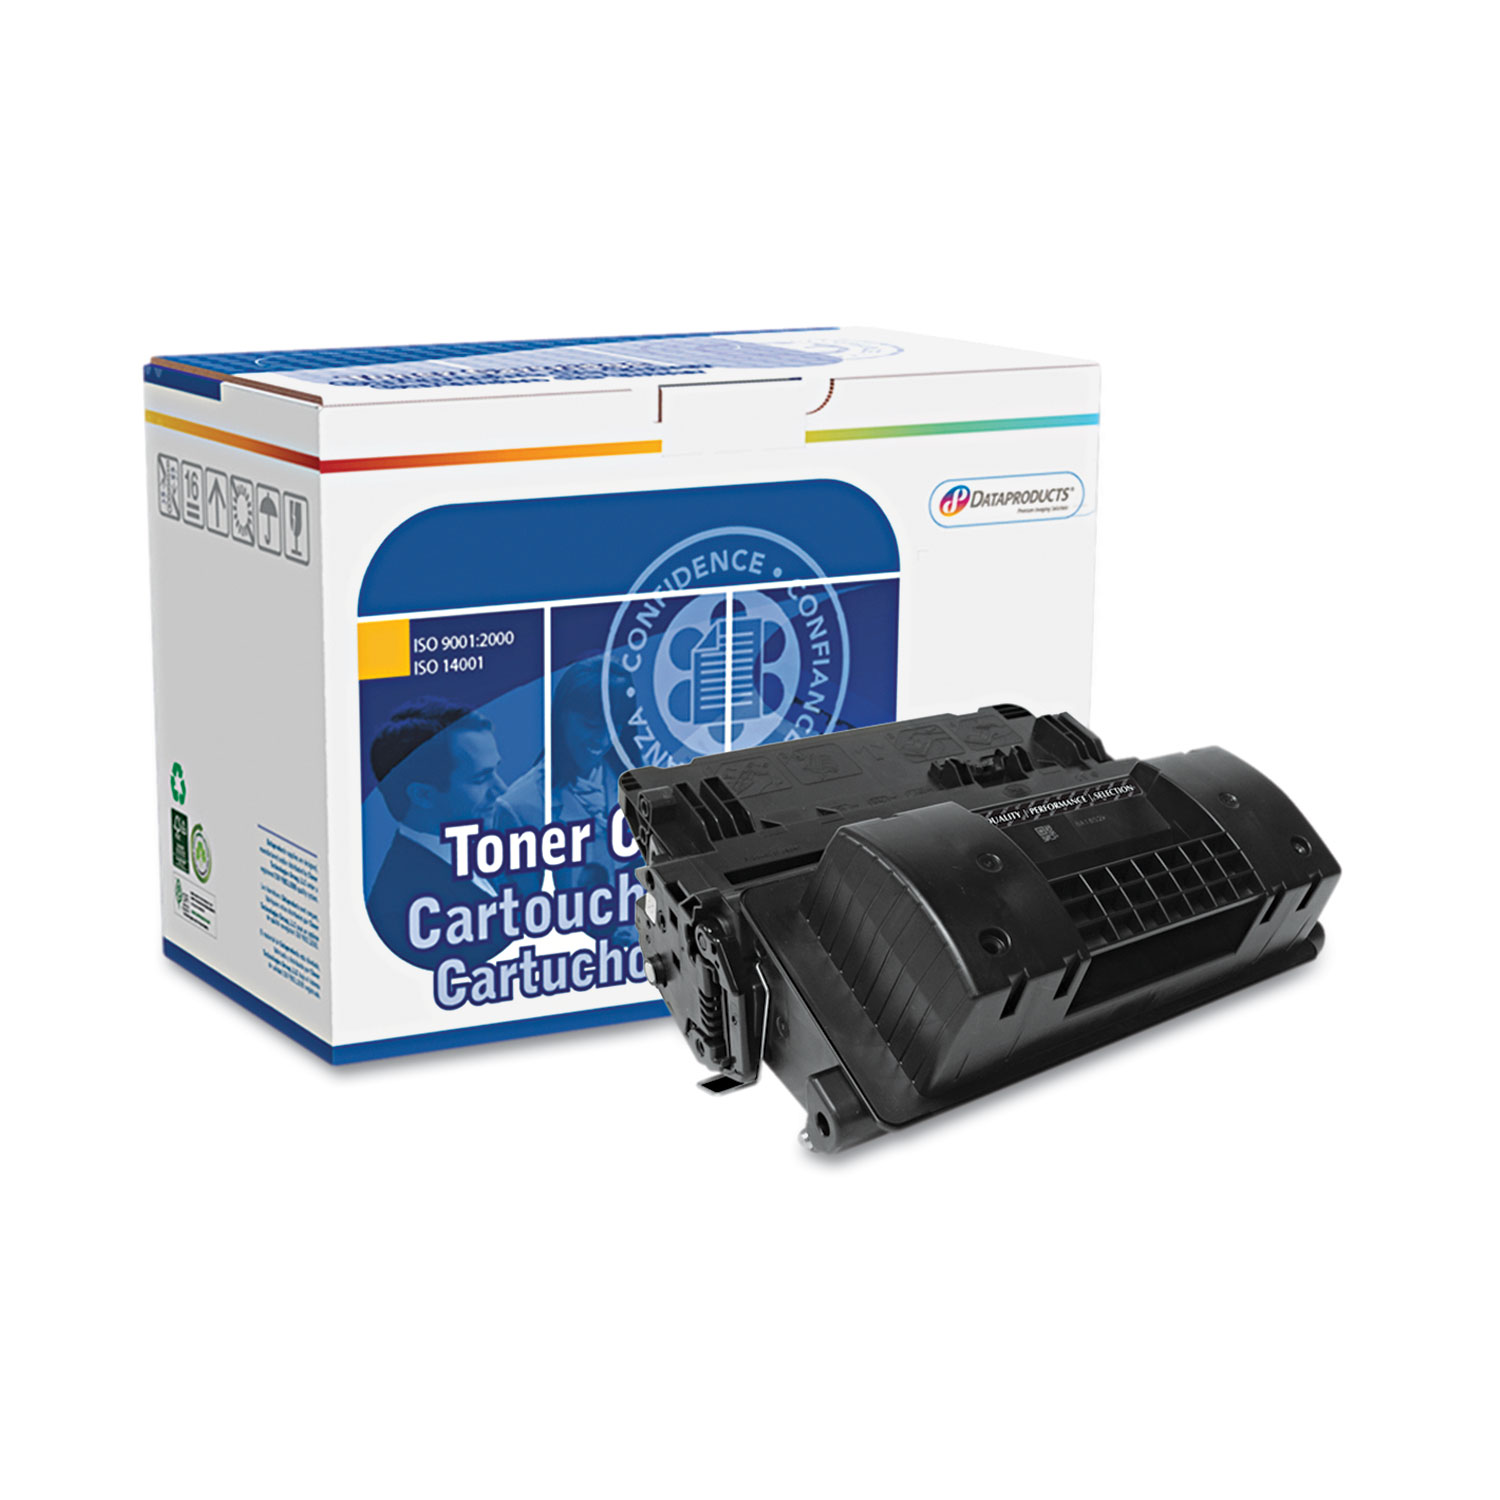 Remanufactured CC364X (64X) High-Yield Toner, 24,000 Page-Yield, Black